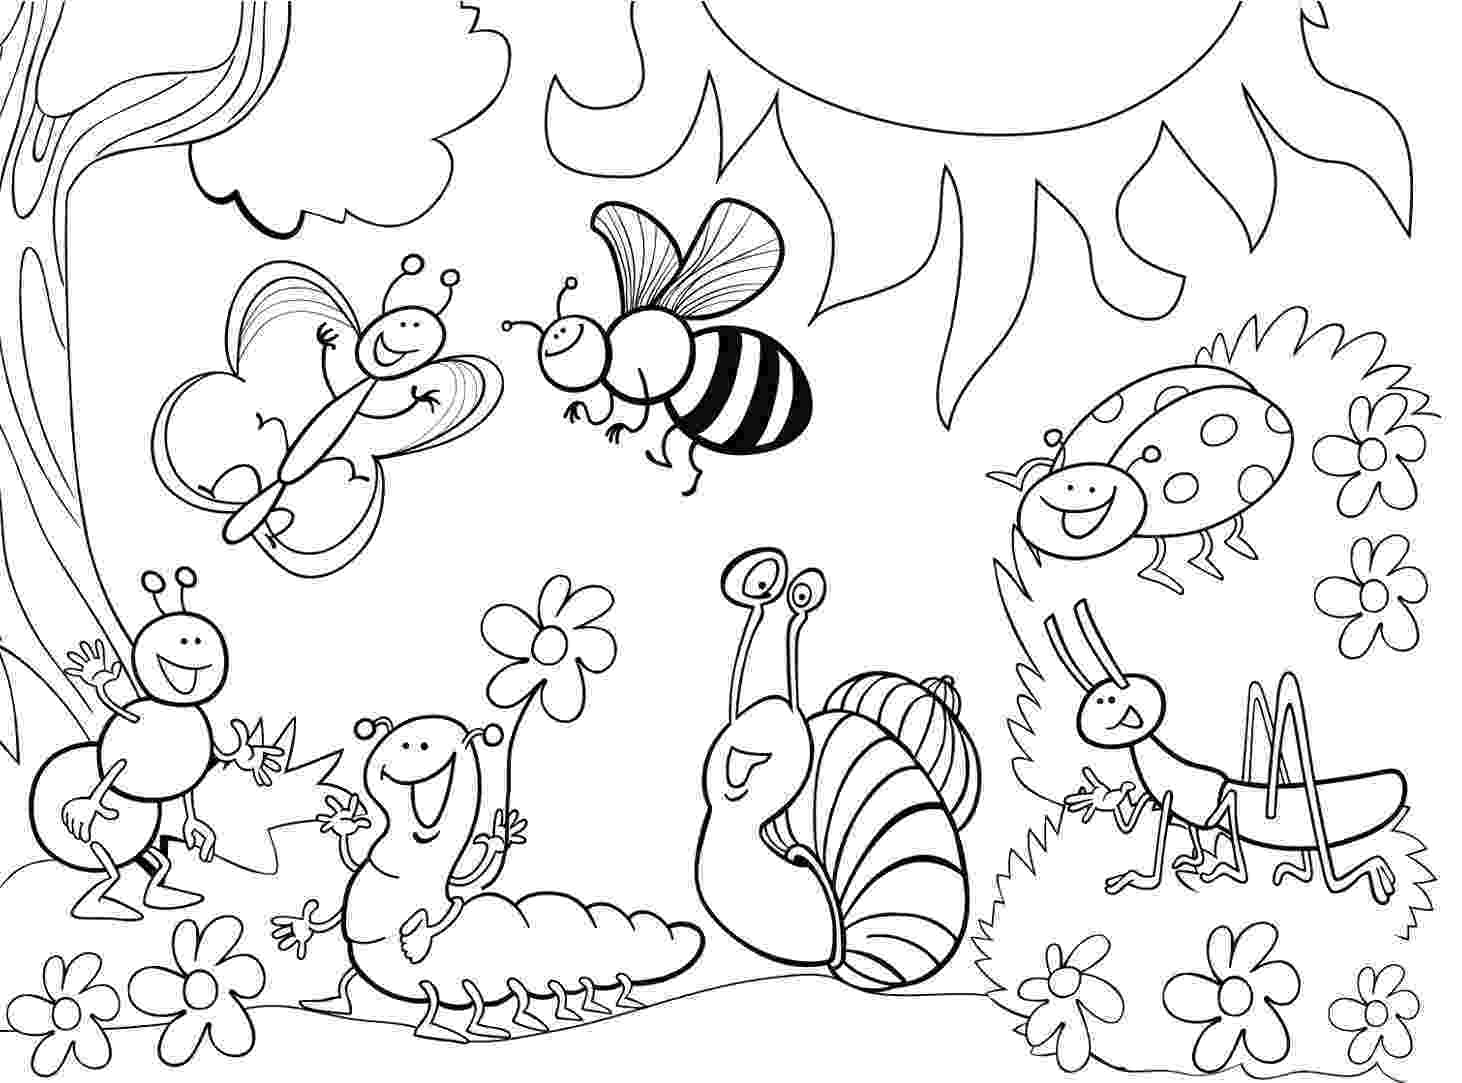 garden pictures to color gardening coloring pages best coloring pages for kids color garden to pictures 